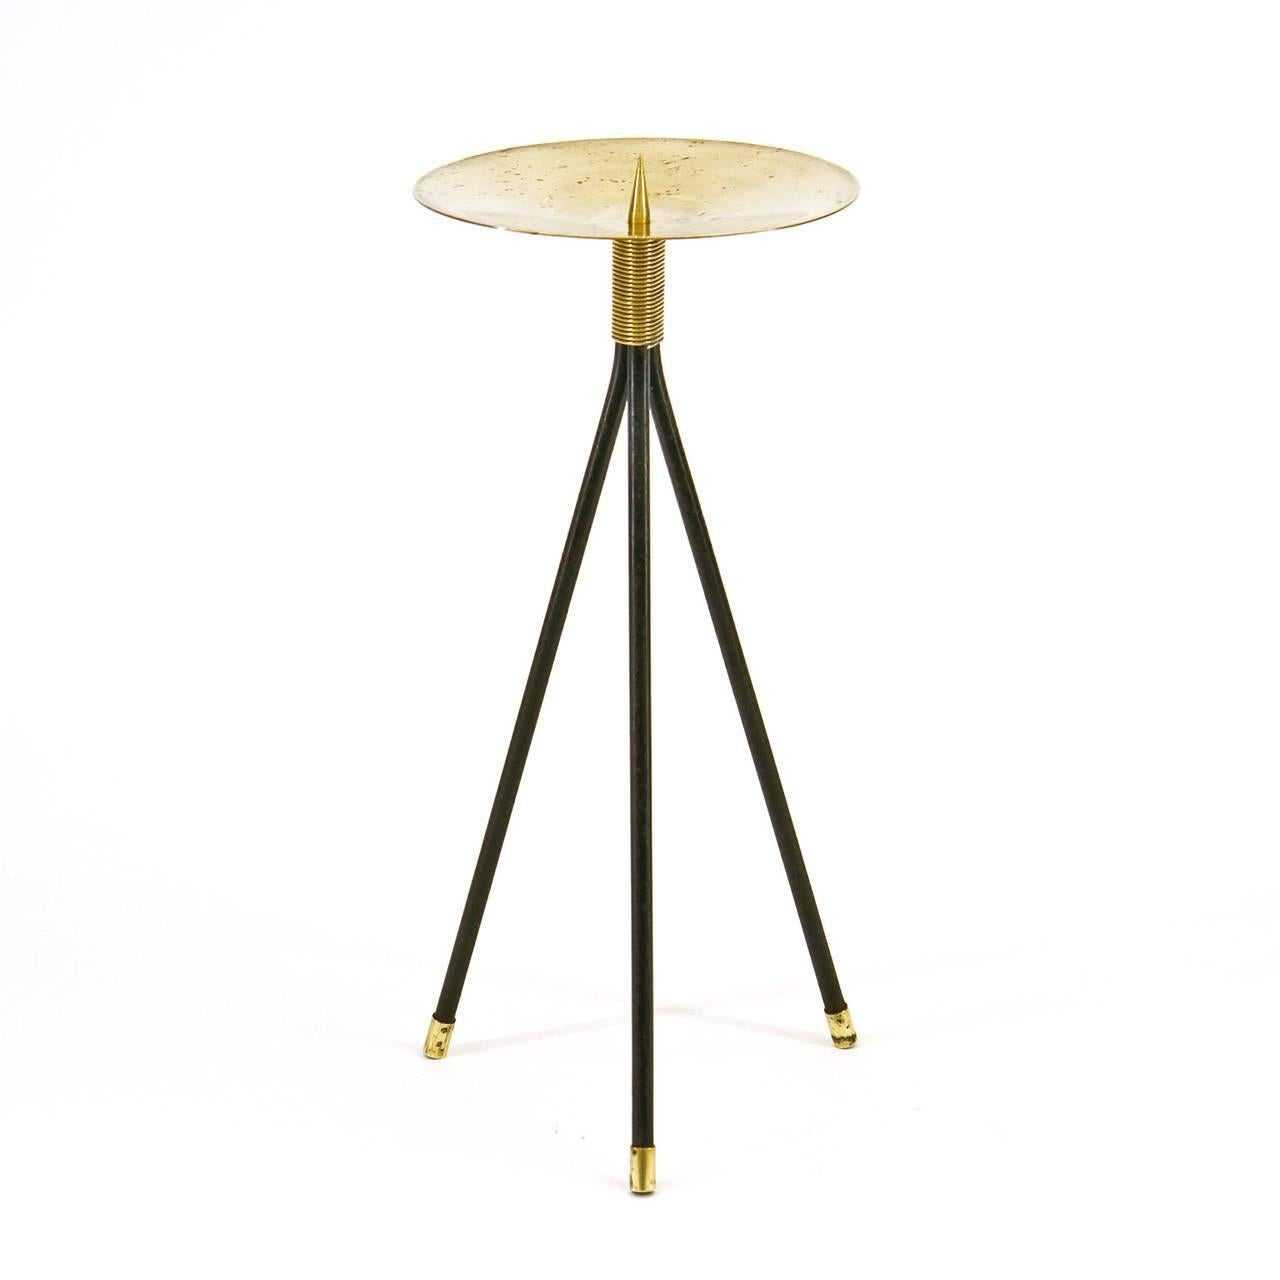 Impressive Midcentury Austrian candle holder in the style of Hagenauer. Lacquered tripod base with a large (20cm/8